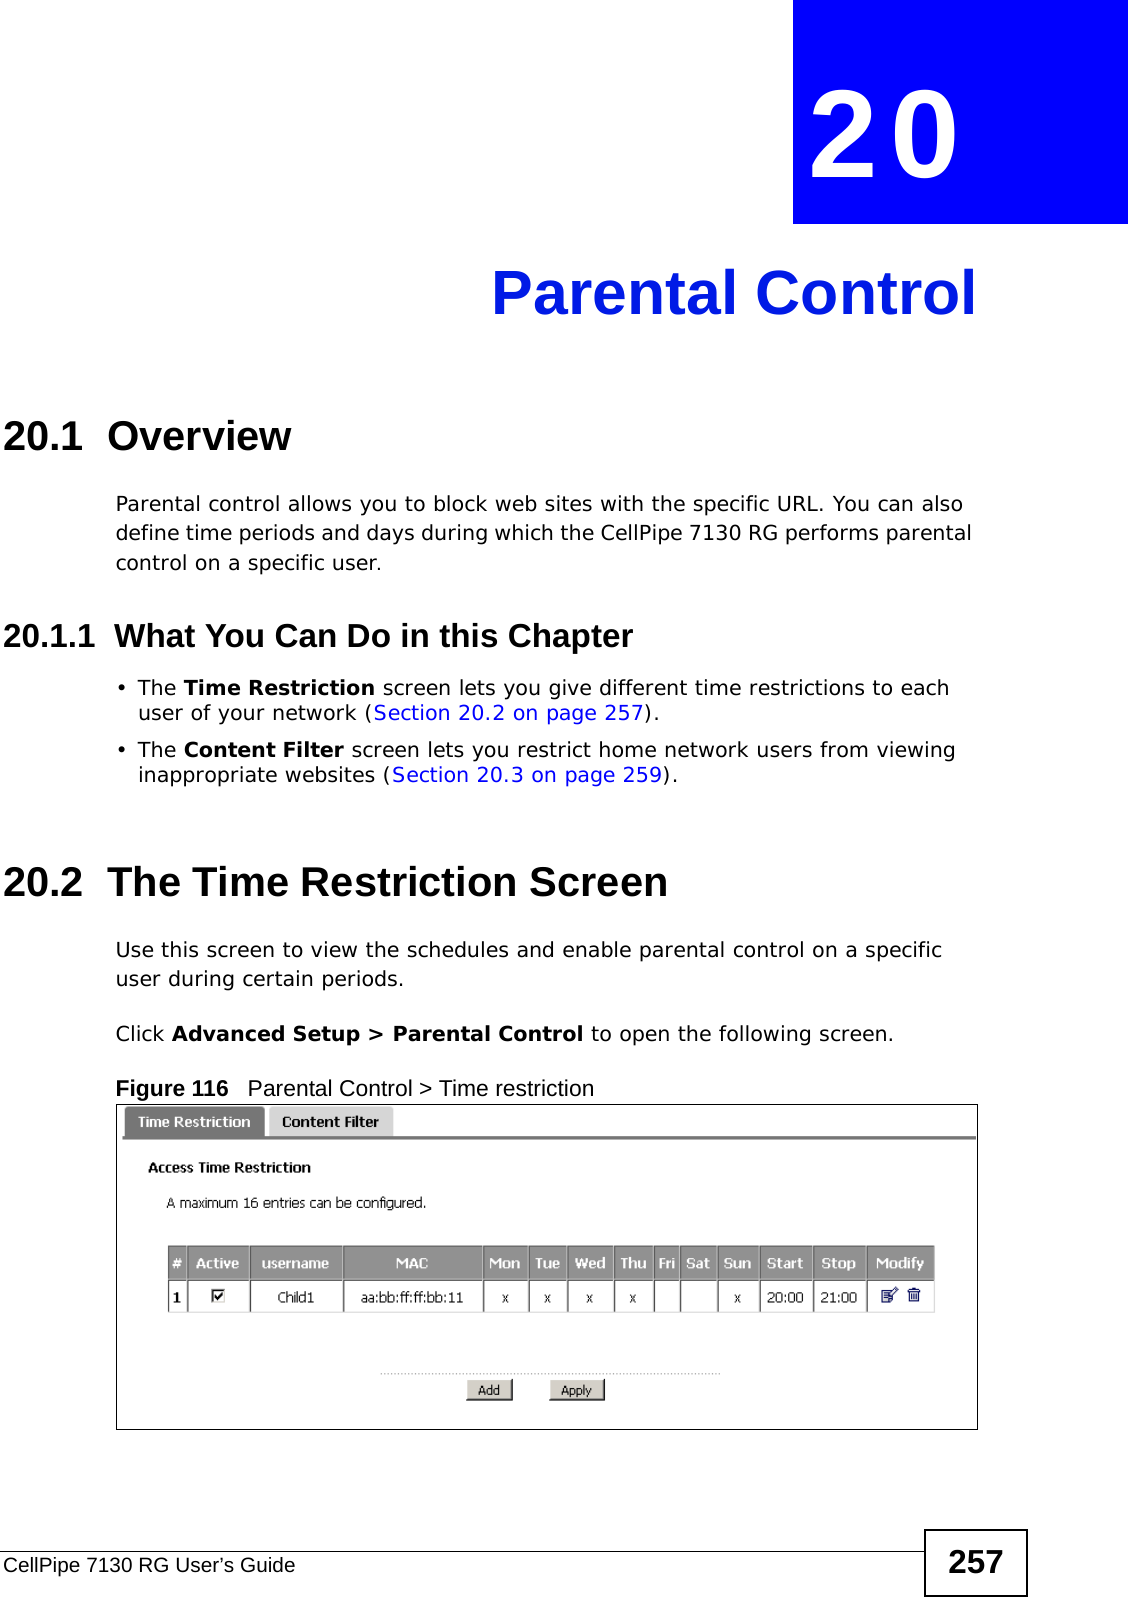 CellPipe 7130 RG User’s Guide 257CHAPTER  20 Parental Control20.1  OverviewParental control allows you to block web sites with the specific URL. You can also define time periods and days during which the CellPipe 7130 RG performs parental control on a specific user. 20.1.1  What You Can Do in this Chapter•The Time Restriction screen lets you give different time restrictions to each user of your network (Section 20.2 on page 257).•The Content Filter screen lets you restrict home network users from viewing inappropriate websites (Section 20.3 on page 259).20.2  The Time Restriction ScreenUse this screen to view the schedules and enable parental control on a specific user during certain periods.Click Advanced Setup &gt; Parental Control to open the following screen. Figure 116   Parental Control &gt; Time restriction 